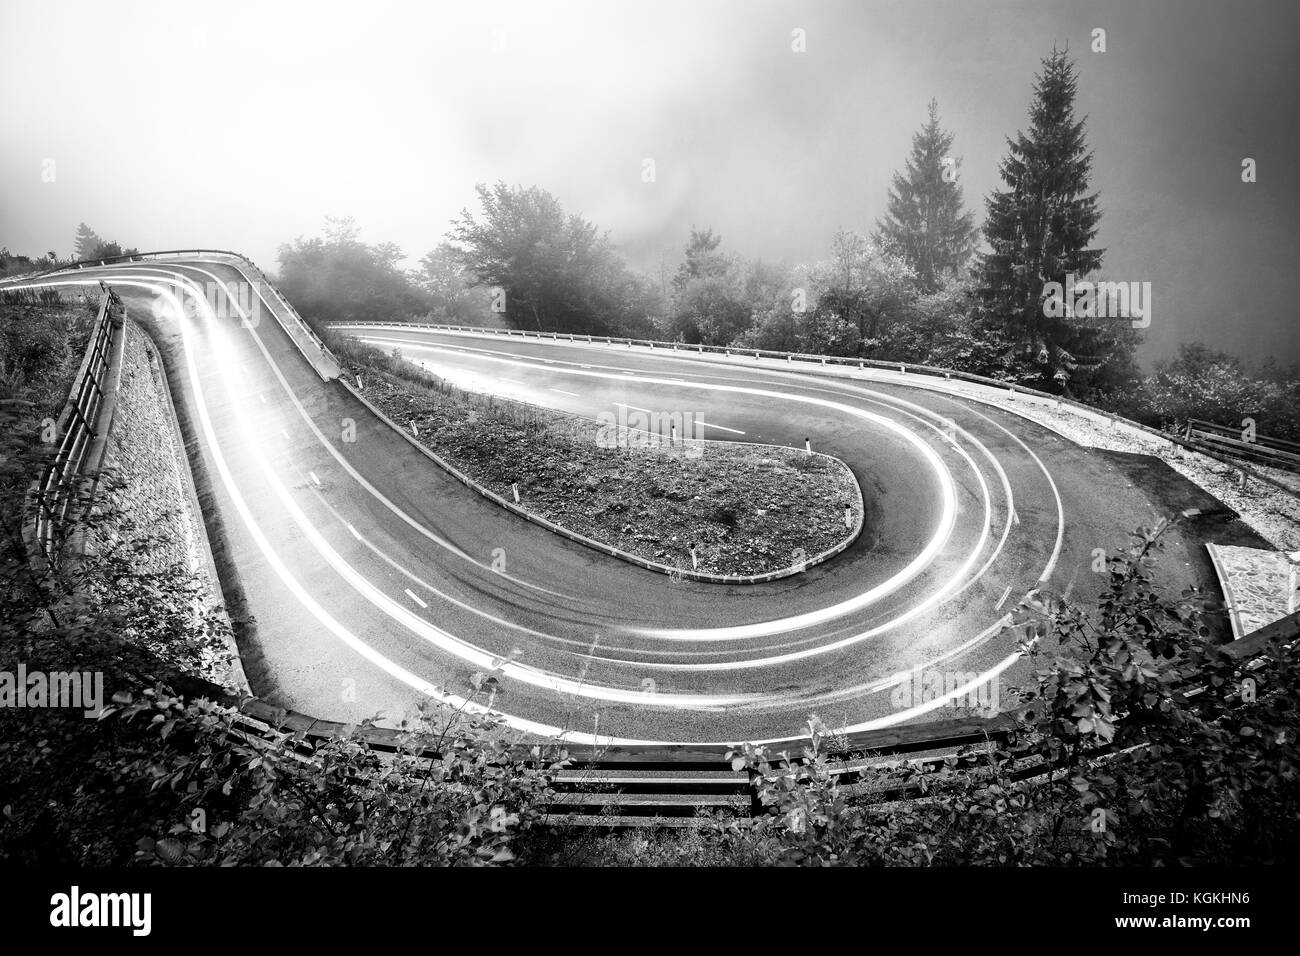 Winding mountain road with car lights. Foggy wet weather and low visibility. Alps, Slovenia. Stock Photo